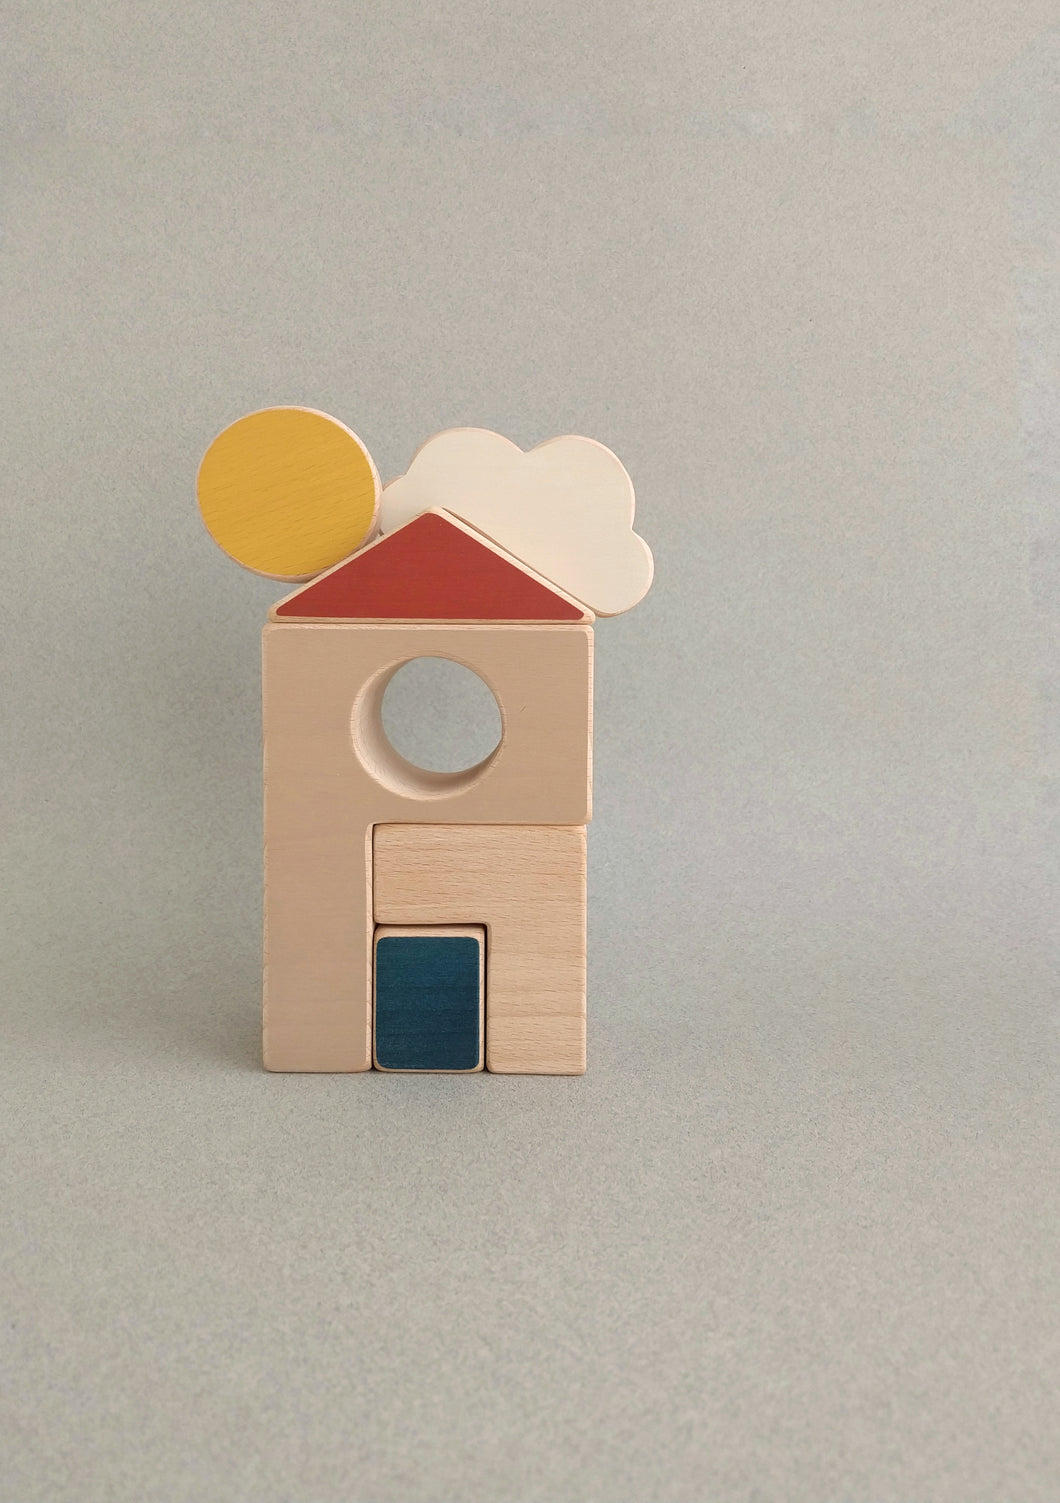 THE WANDERING WORKSHOP House & Sun Puzzle Toy